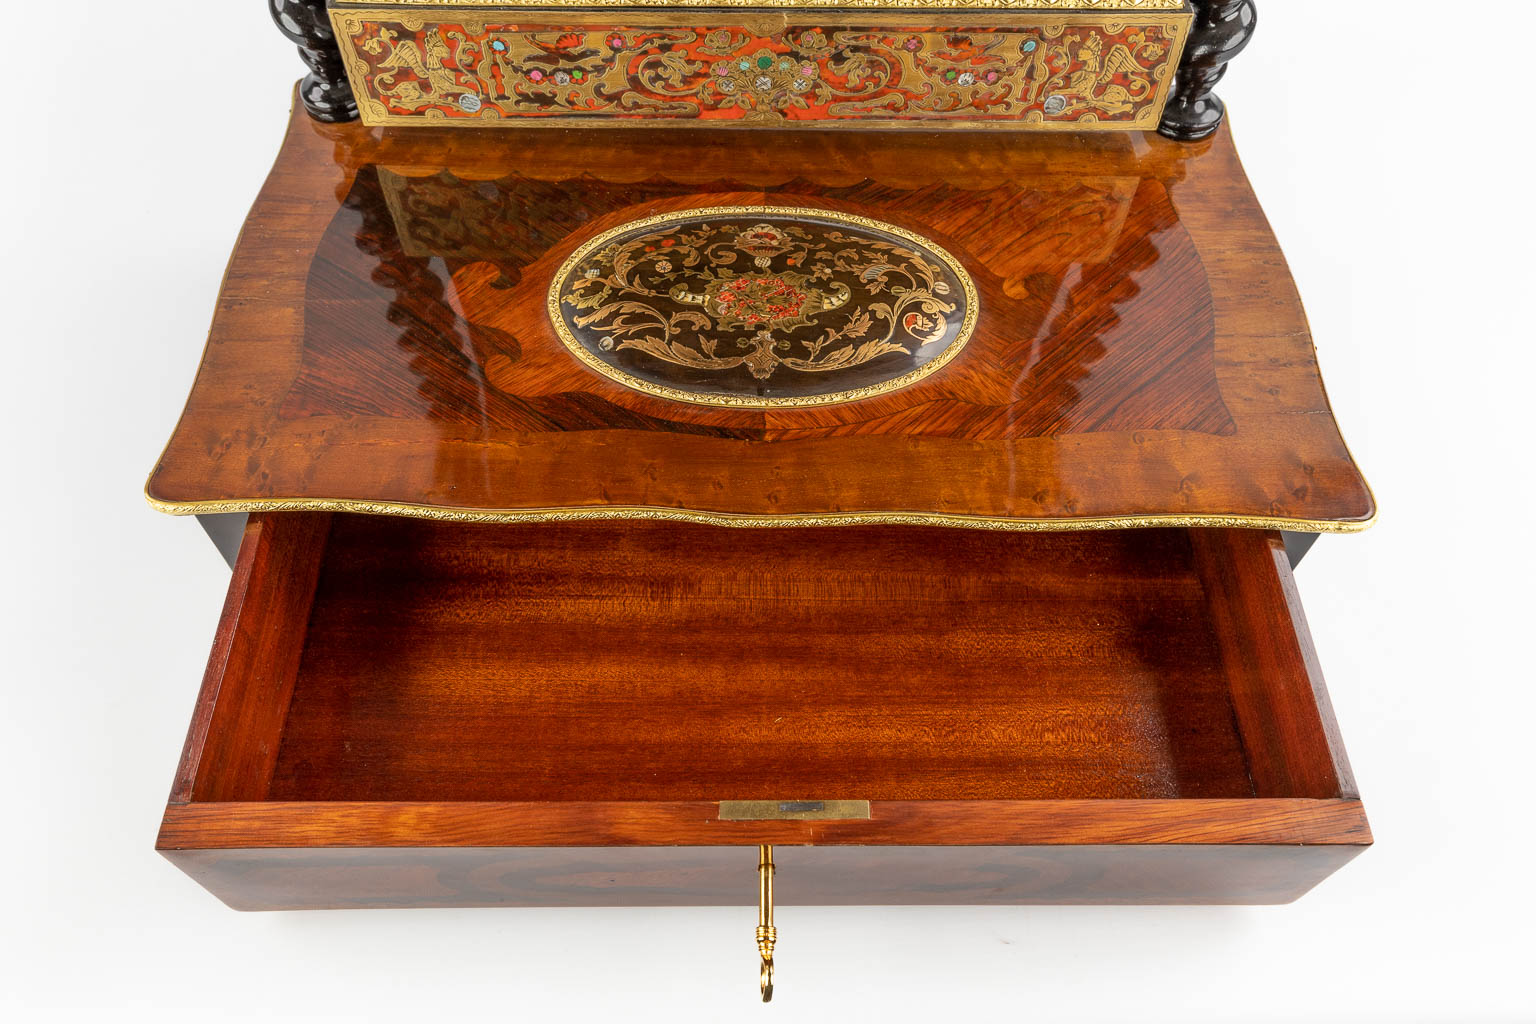 An antique table mirror, Boulle, Tortoiseshell and copper inlay, Napoleon 3, 19th C. (D:30 x W:52 x H:73 cm)